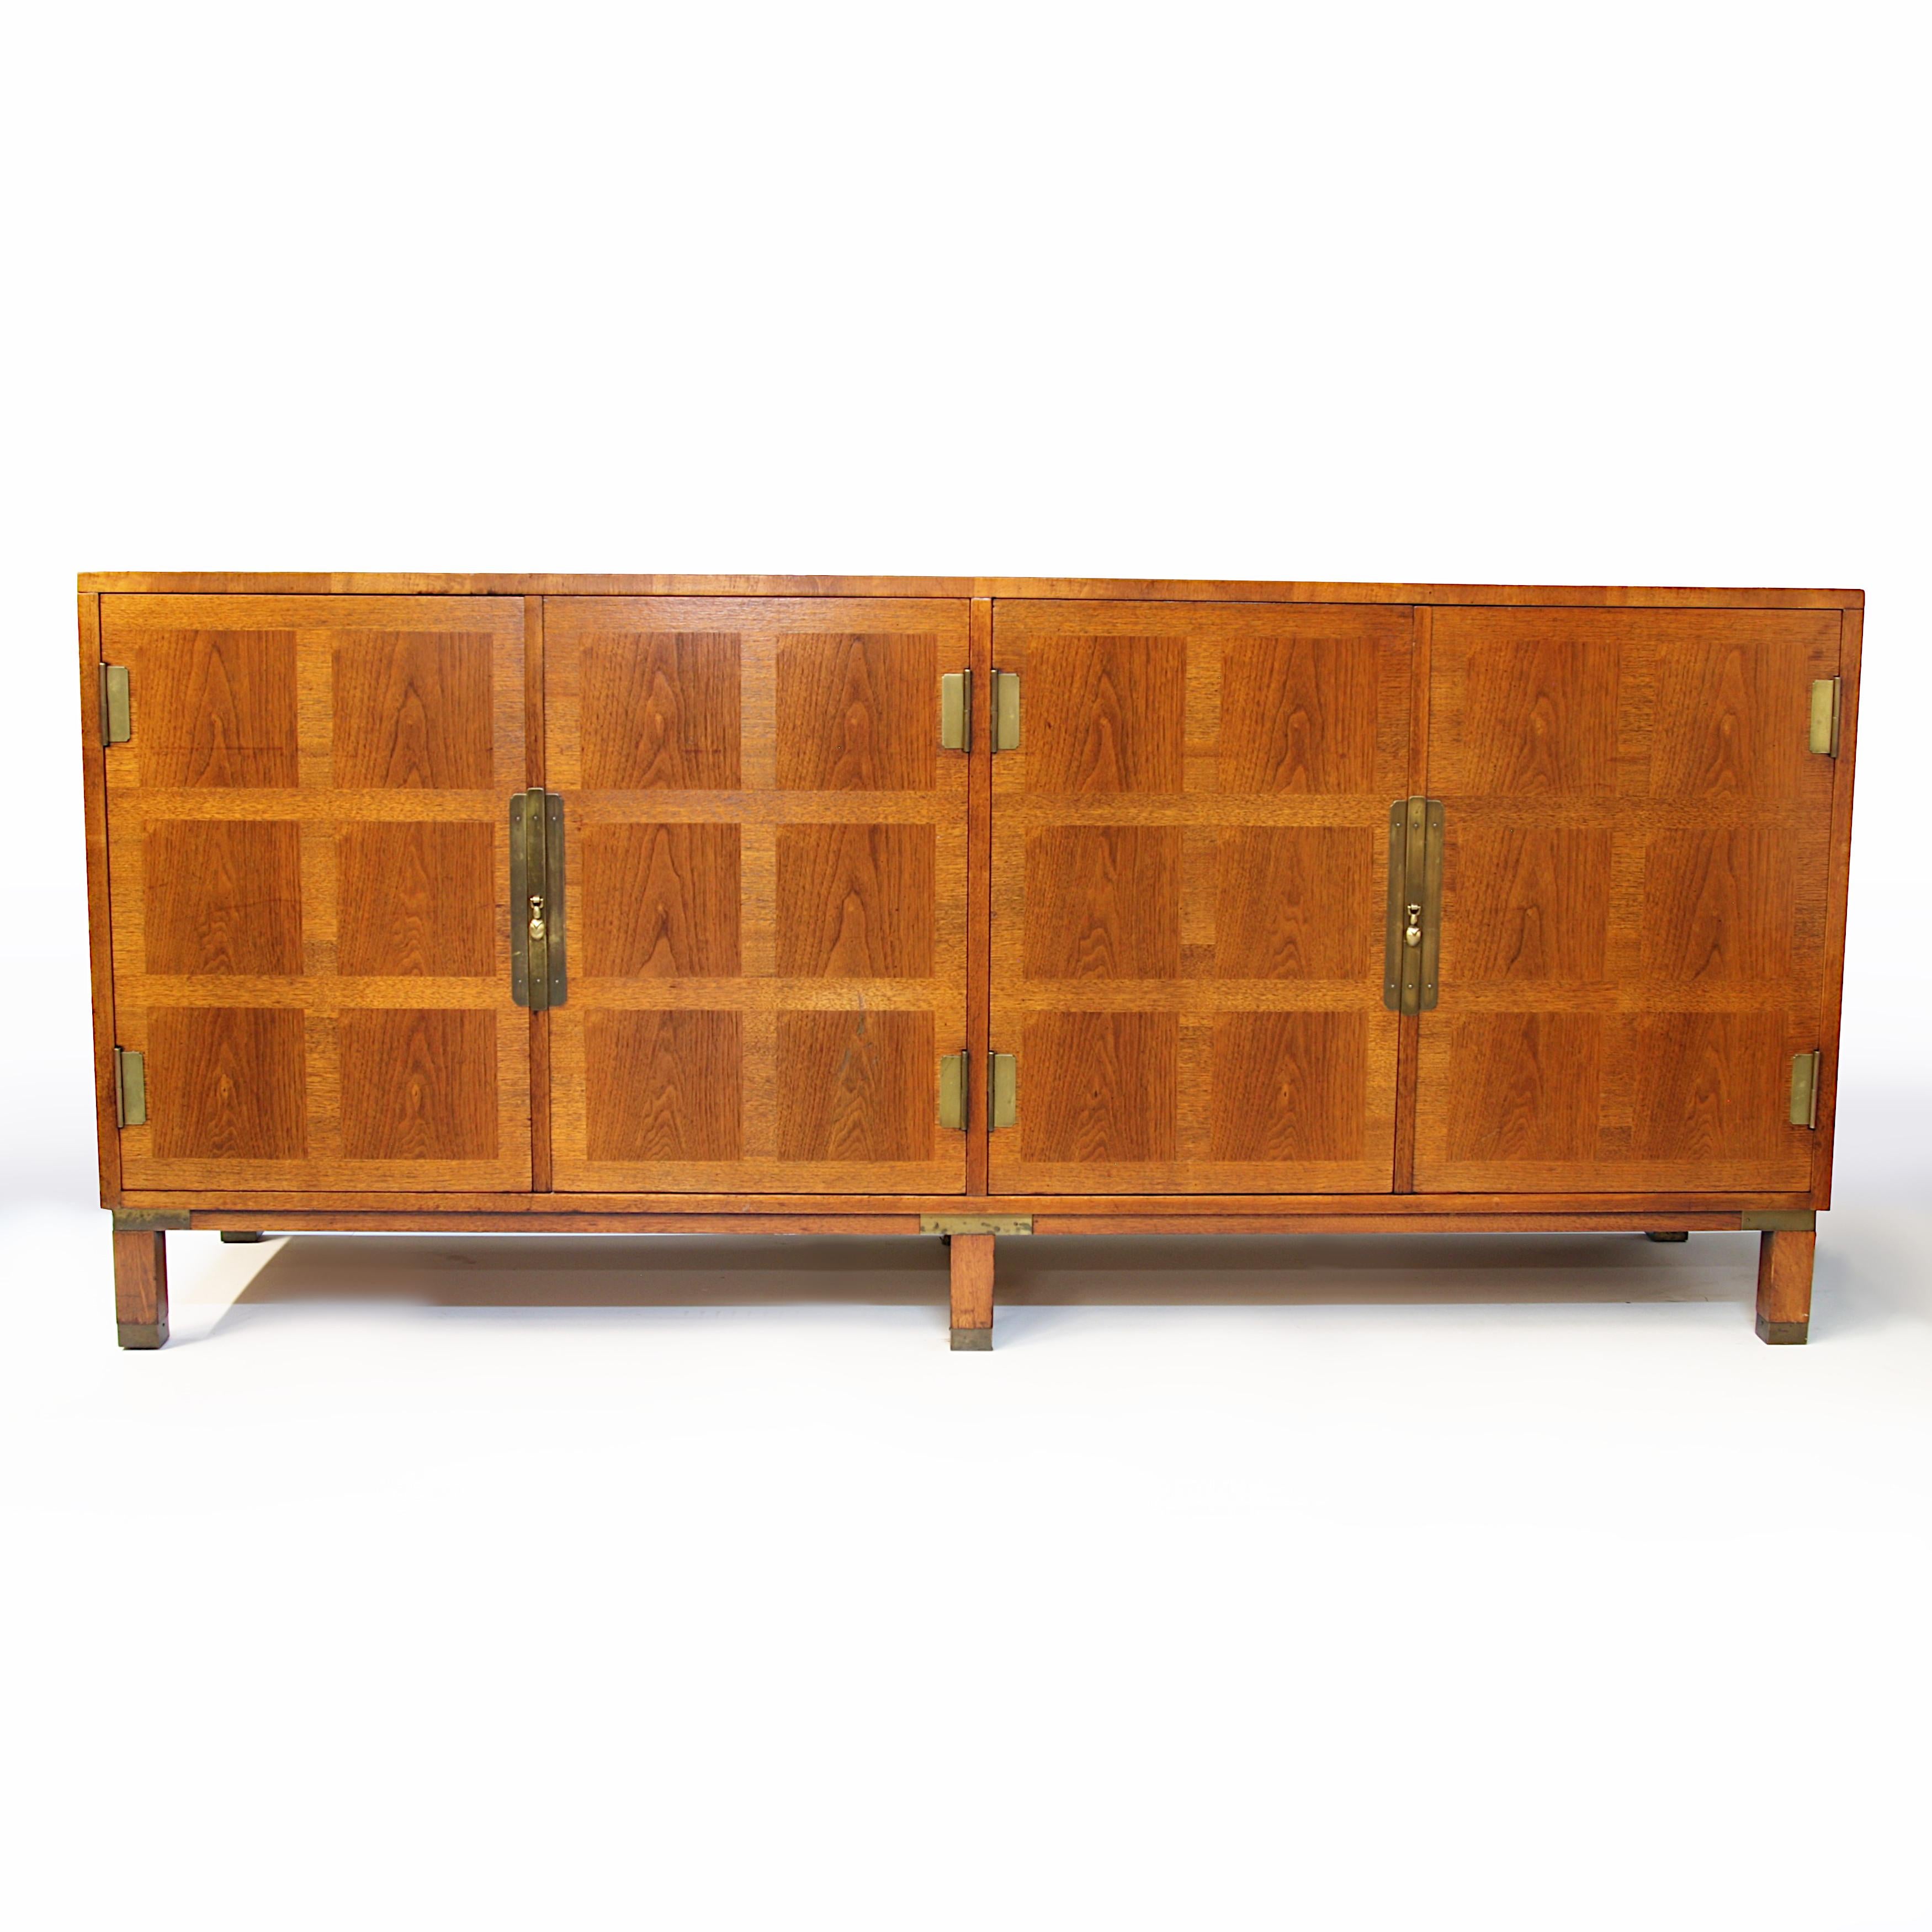 American Vintage Mid-Century Modern Walnut Credenza by Michael Taylor for Baker Furniture